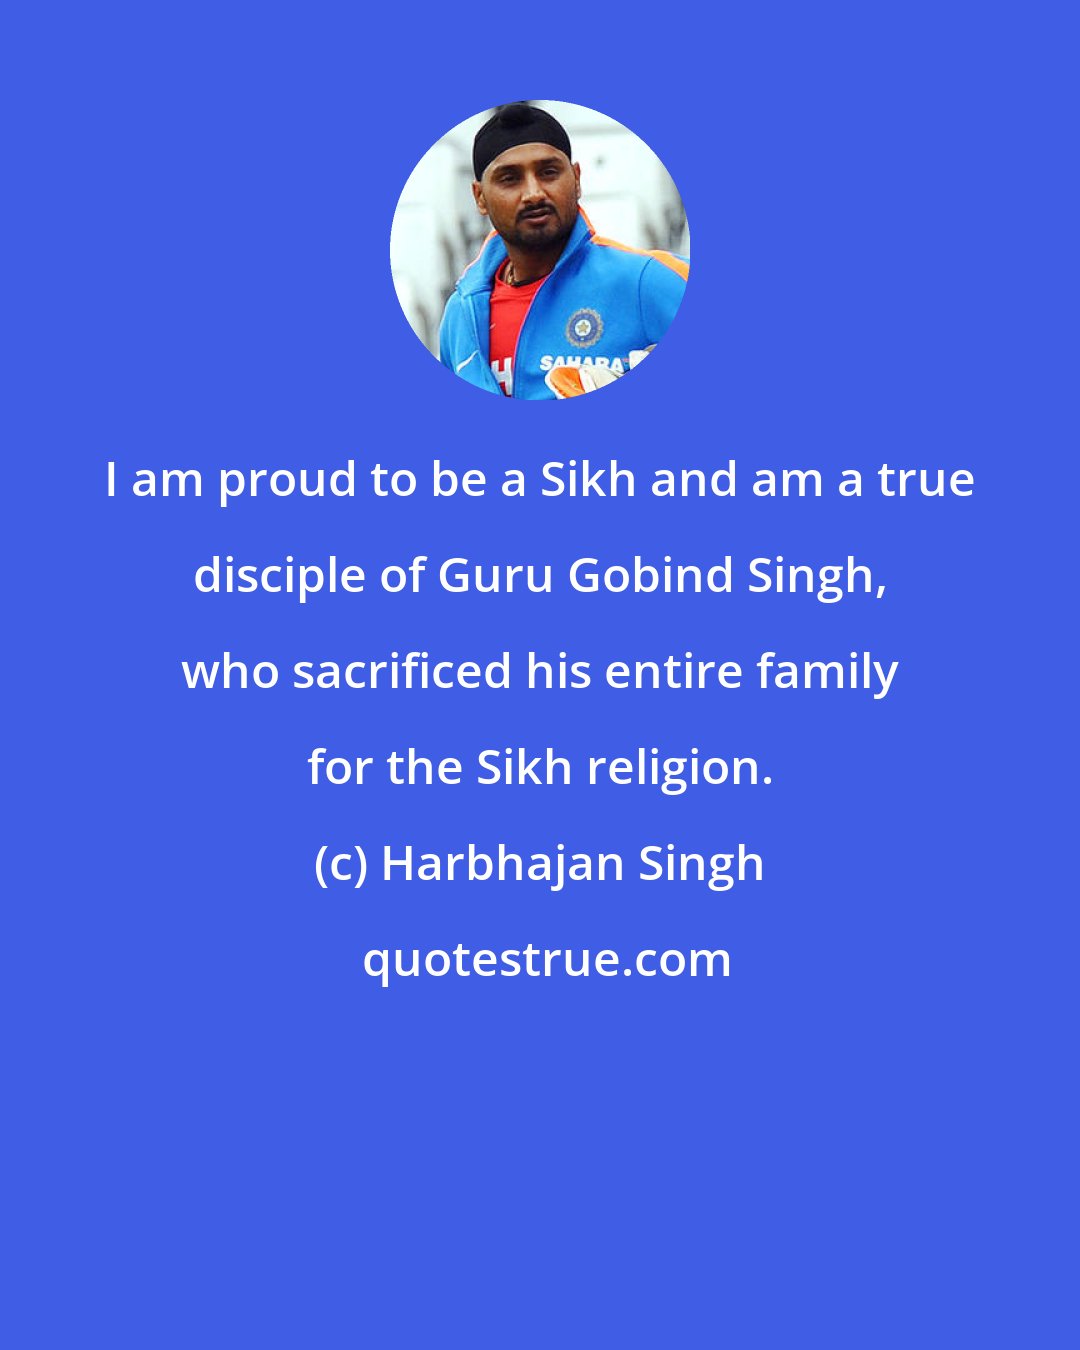 Harbhajan Singh: I am proud to be a Sikh and am a true disciple of Guru Gobind Singh, who sacrificed his entire family for the Sikh religion.